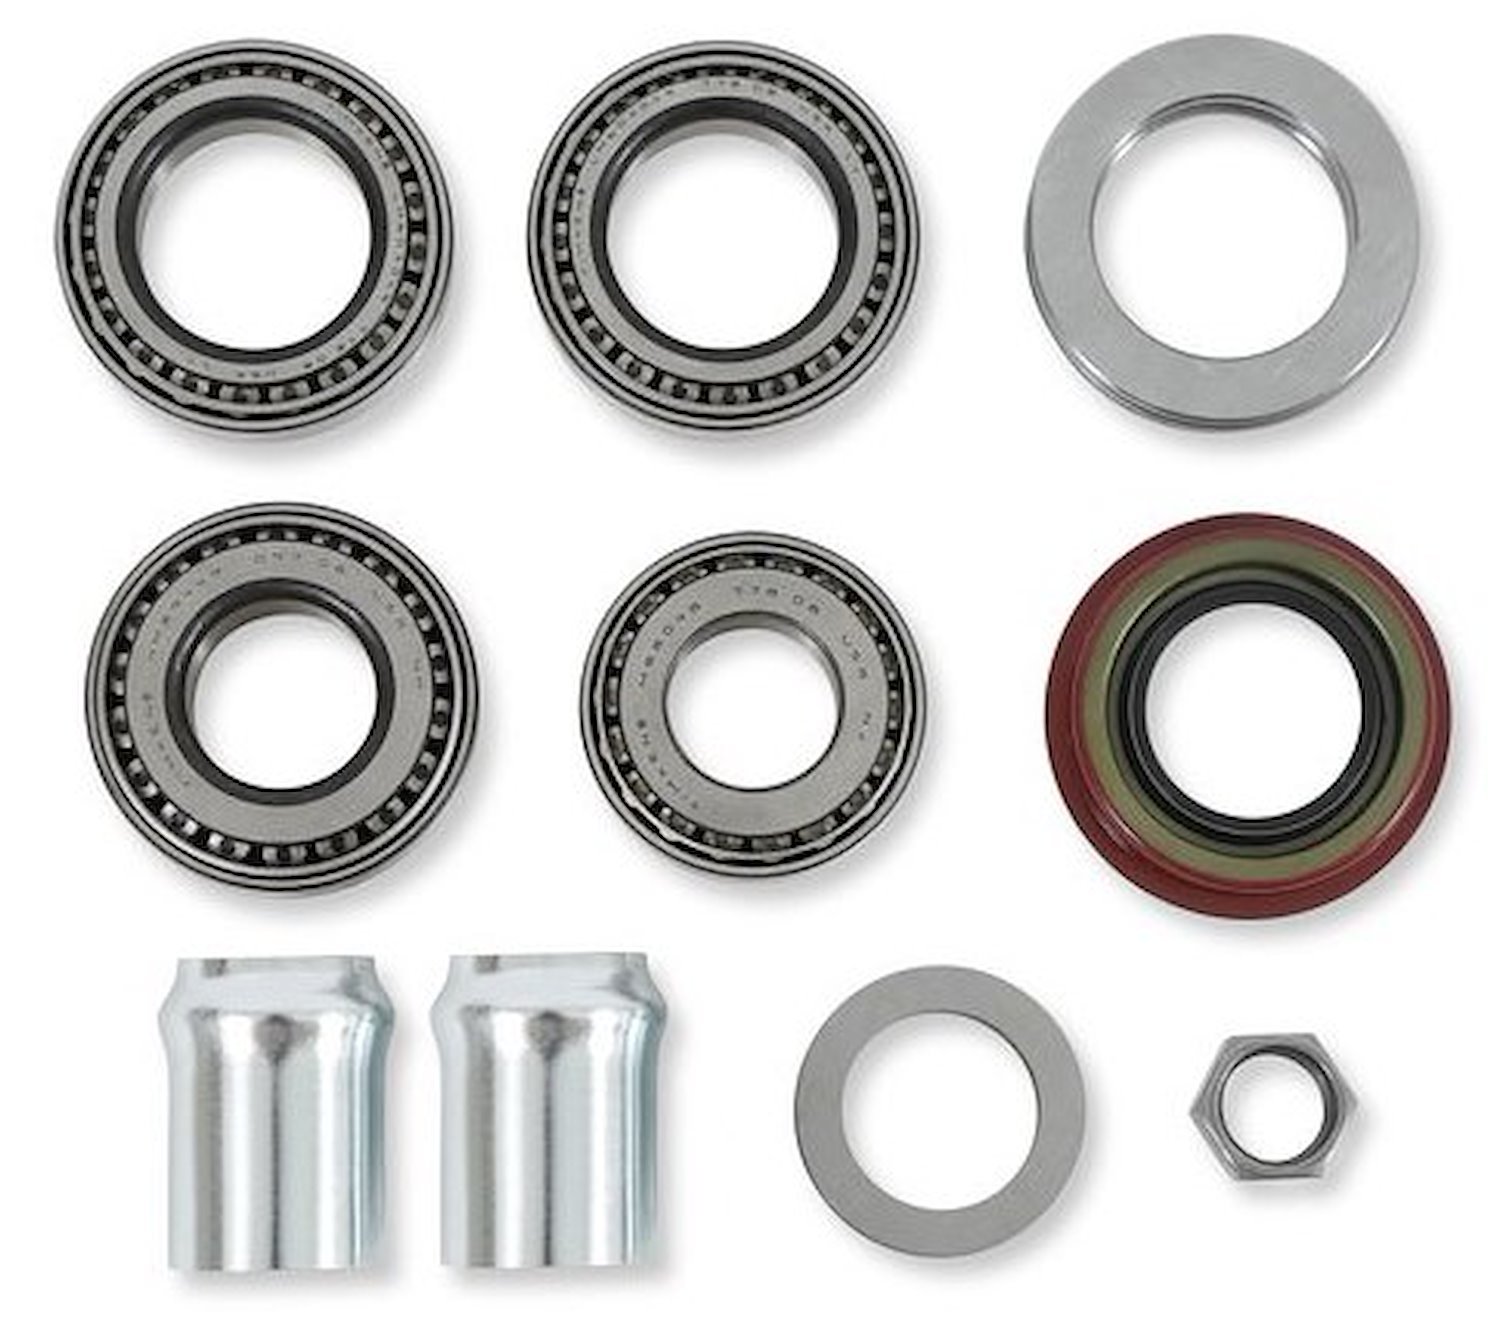 Master Overhaul Kit for 1963-1991 GM Trucks, SUVs w/8.875 in. GM Truck 12-Bolt Differential (2WD/4WD)